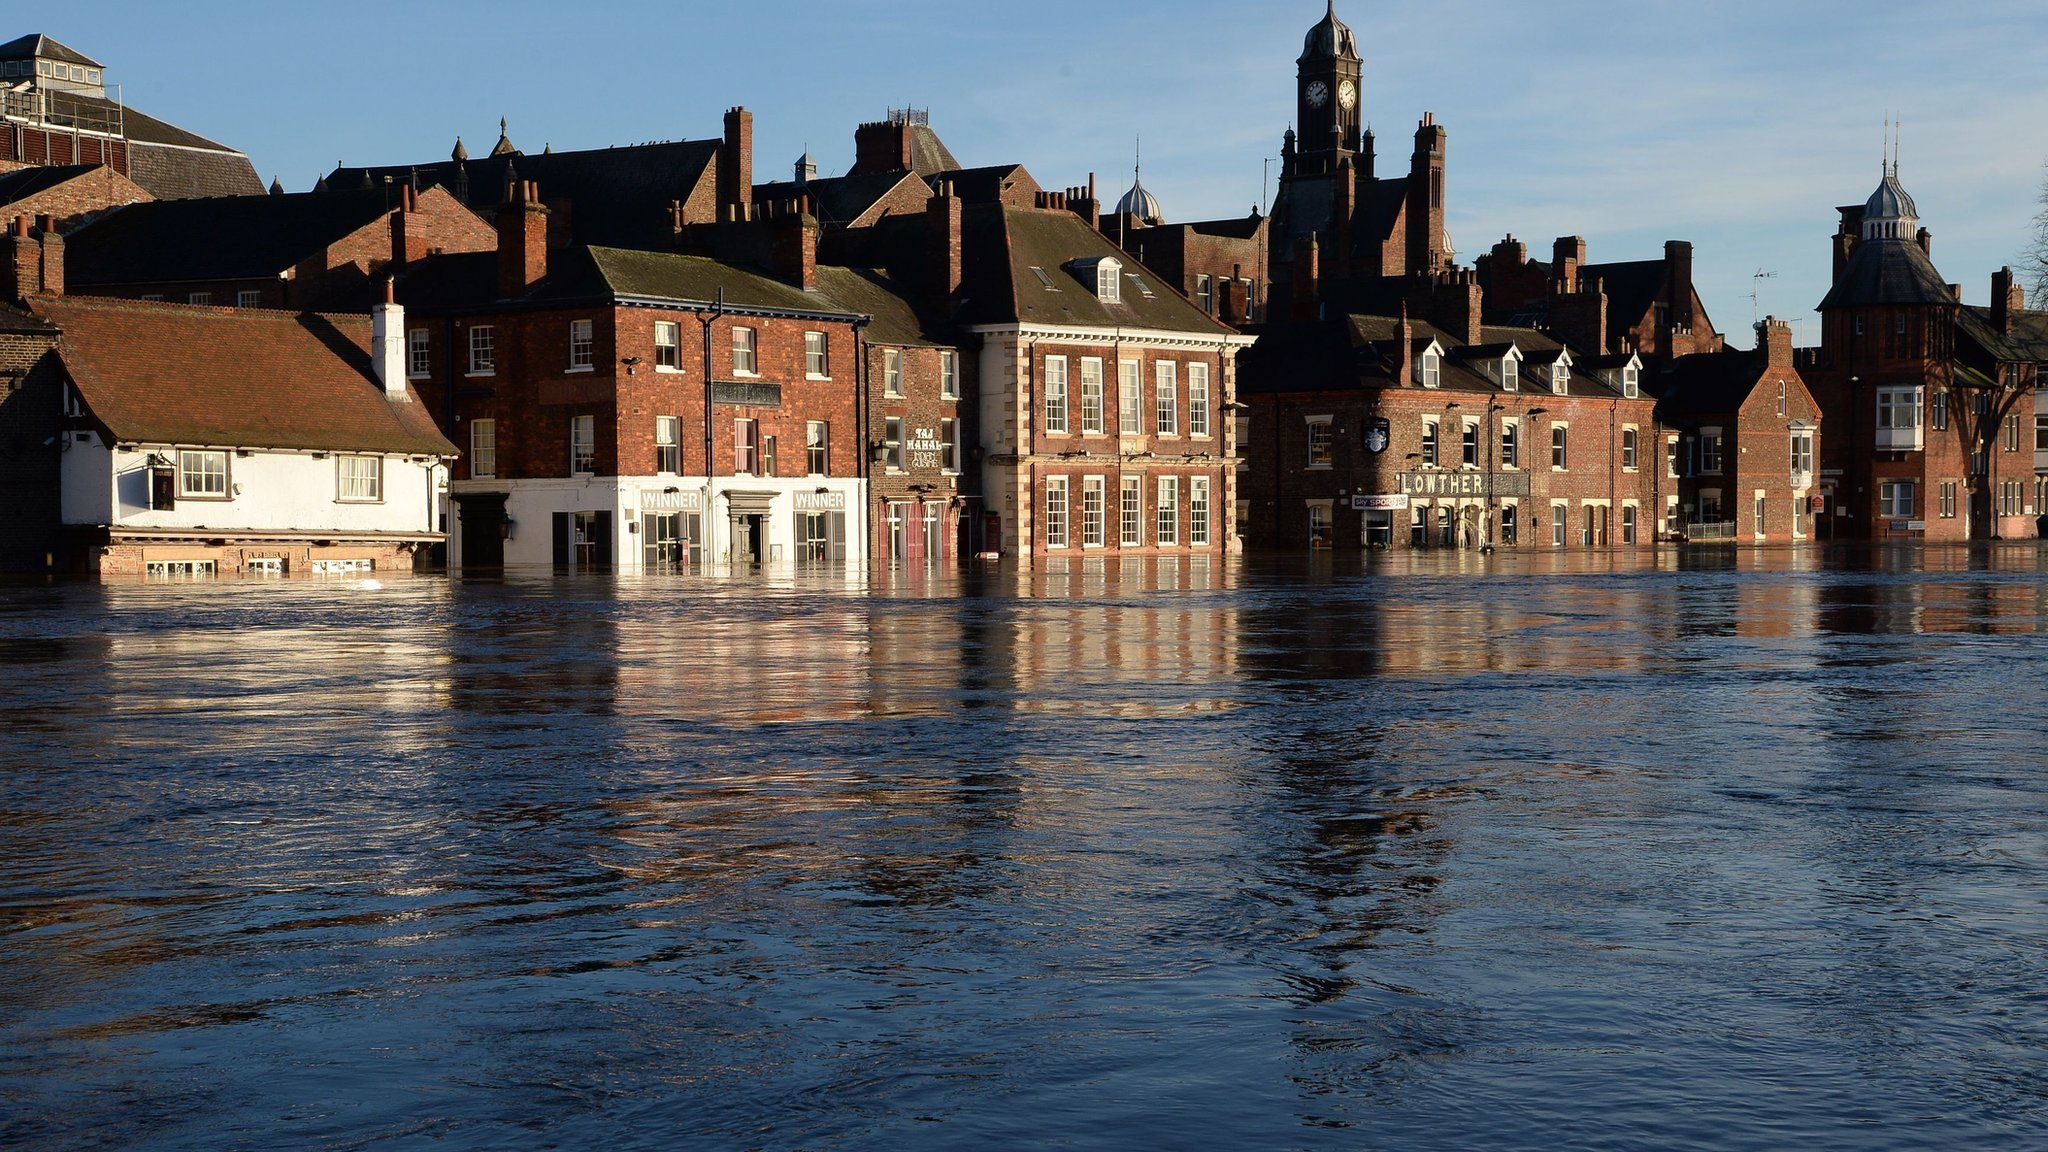 Properties next to the swollen River Ouse in York on 27 December 2015